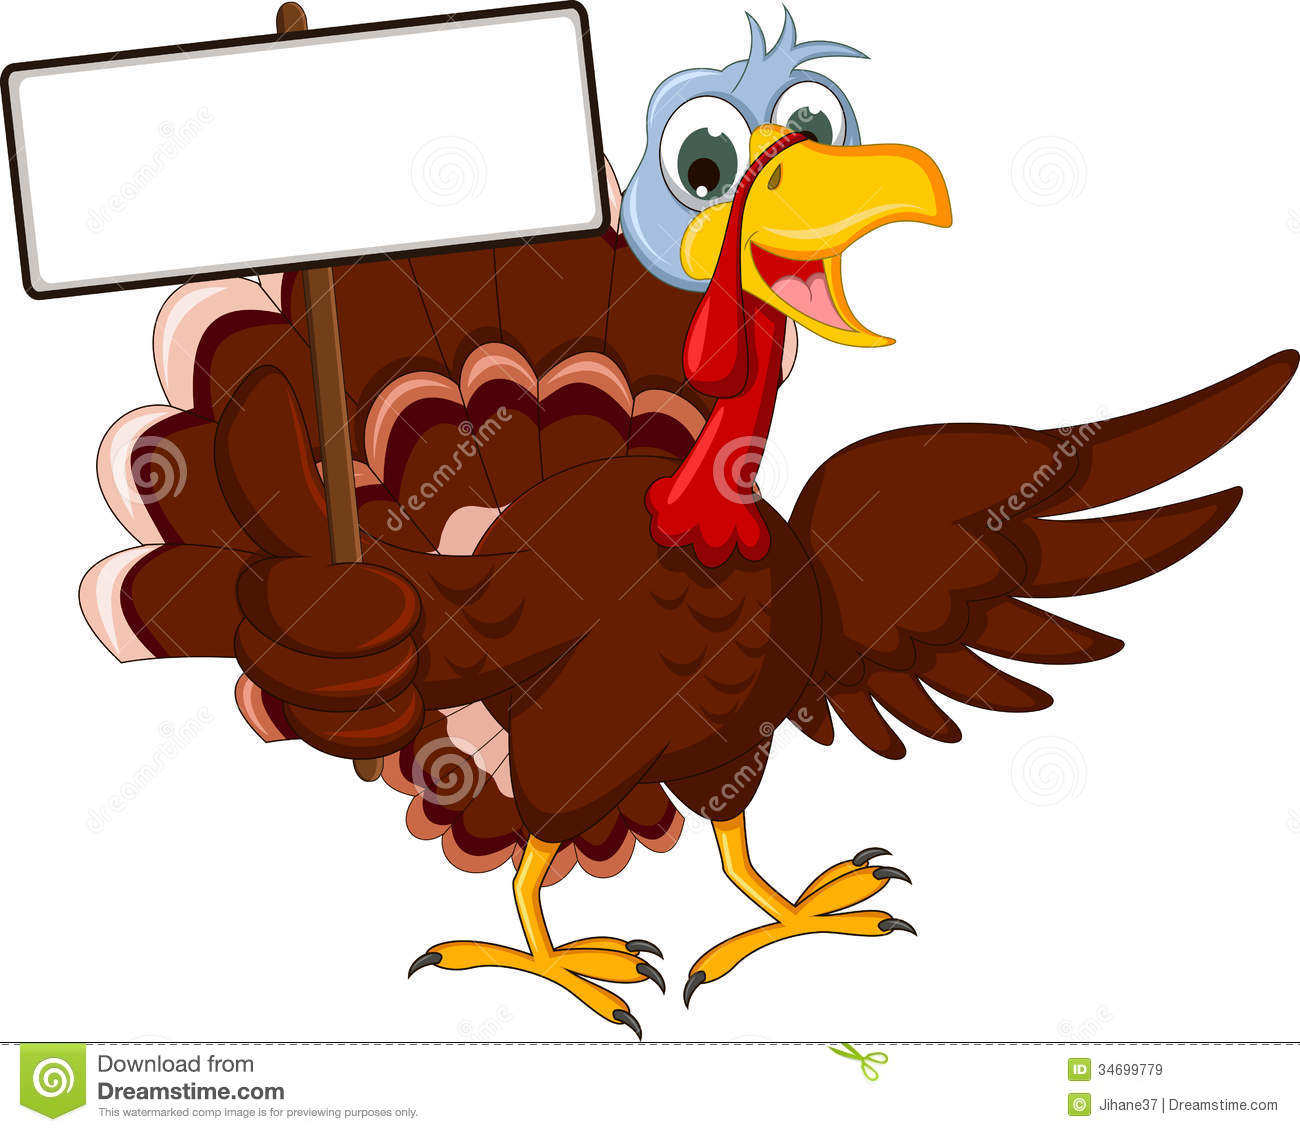 Funny Turkey Cartoon Posing With Blank Sign Royalty Free Stock Images    